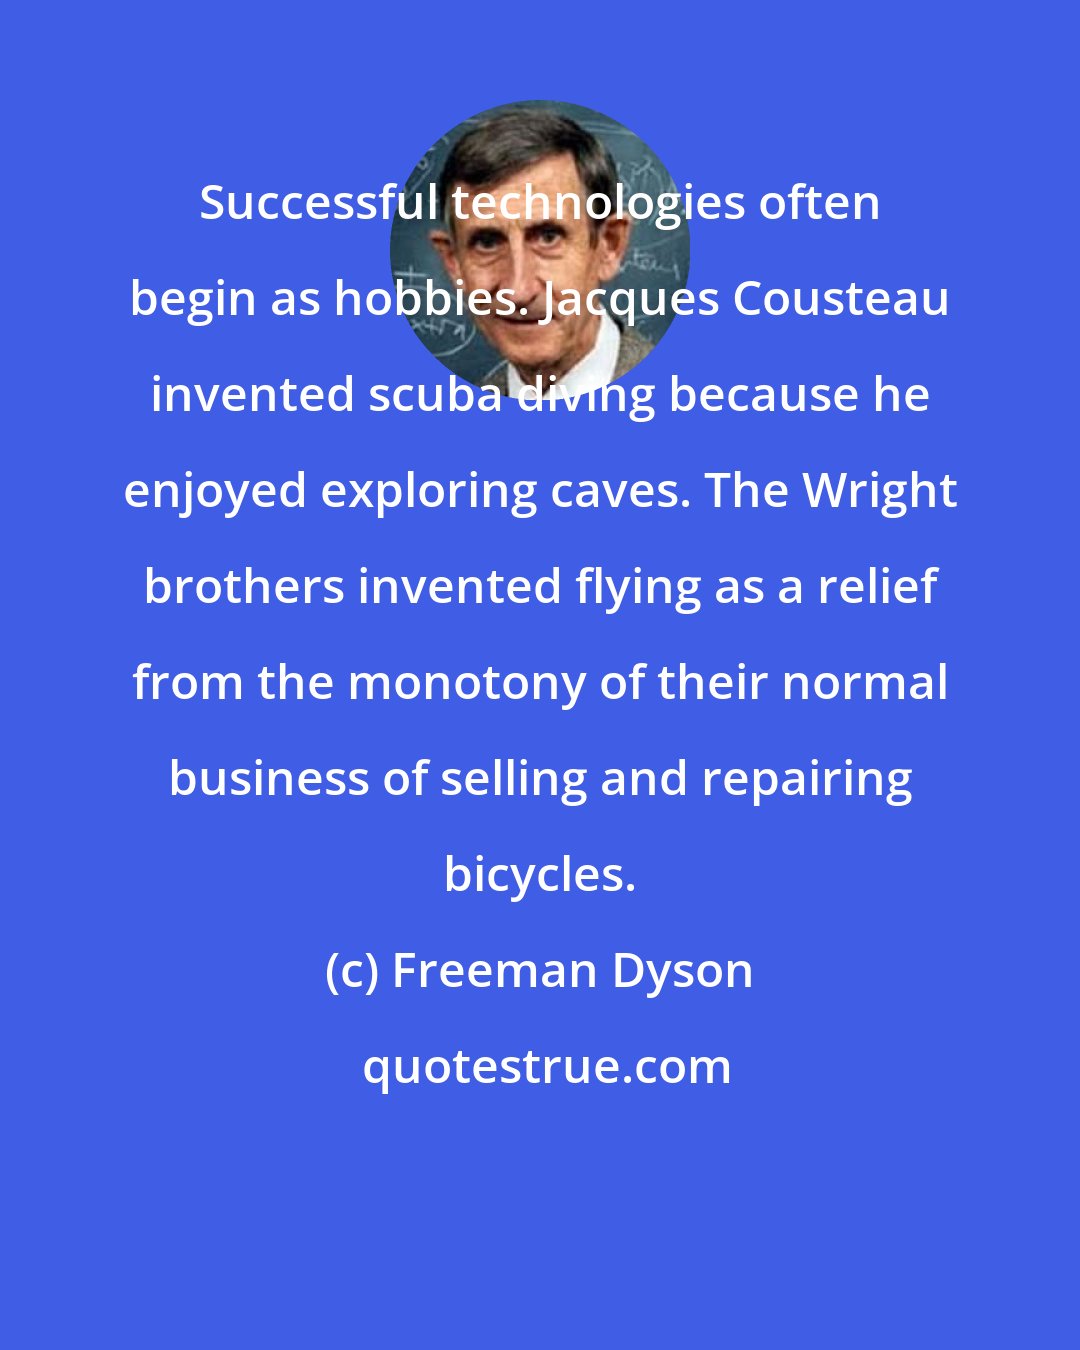 Freeman Dyson: Successful technologies often begin as hobbies. Jacques Cousteau invented scuba diving because he enjoyed exploring caves. The Wright brothers invented flying as a relief from the monotony of their normal business of selling and repairing bicycles.